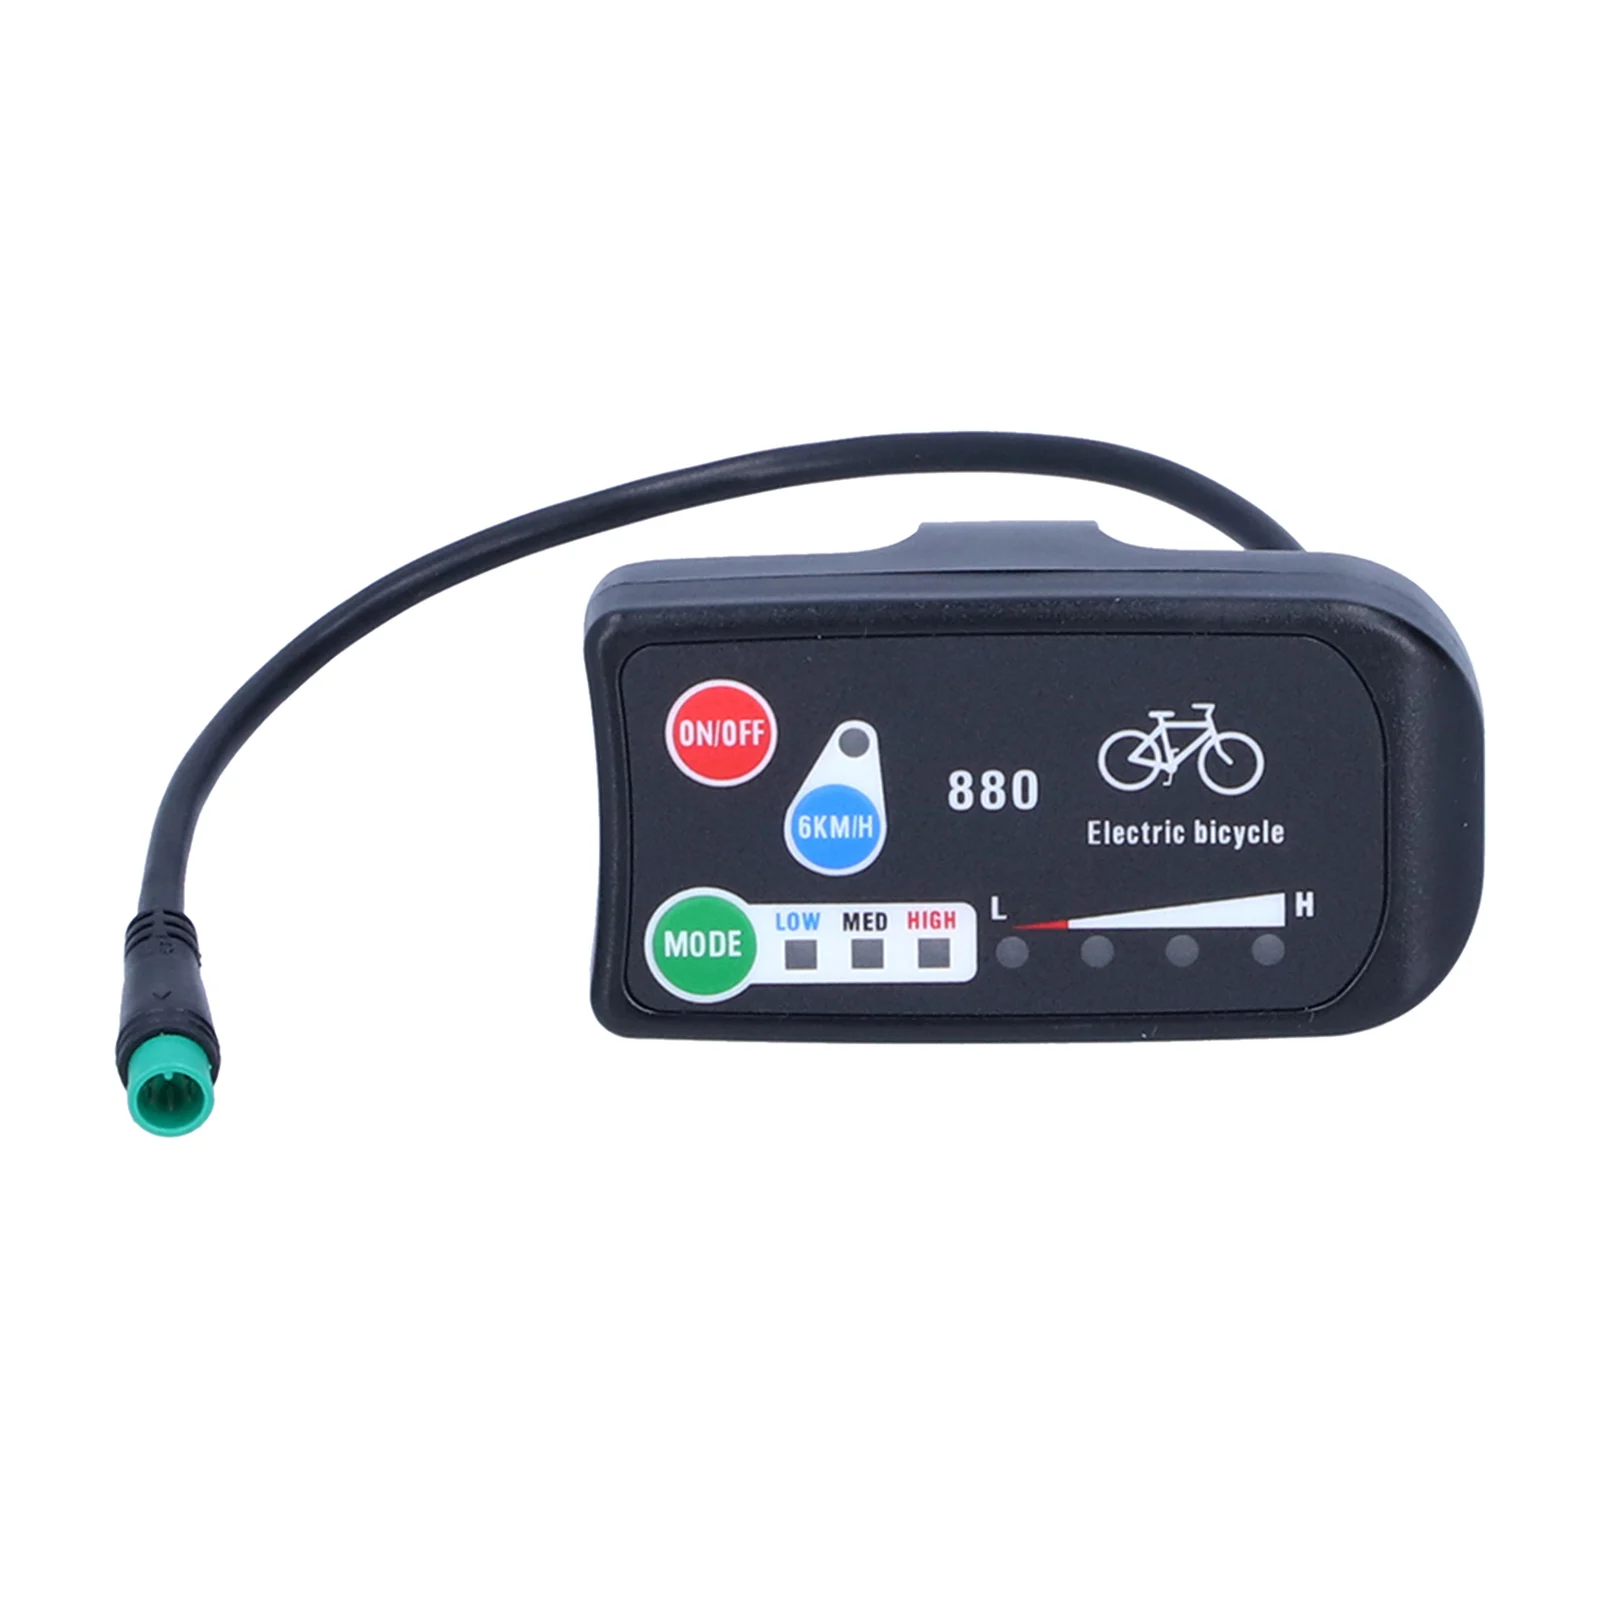 FOCAN Ebike LED Display 24V 36V 48V S800 810 Electric Bicycle Bike Display for Electric scooter brushless controller 250W